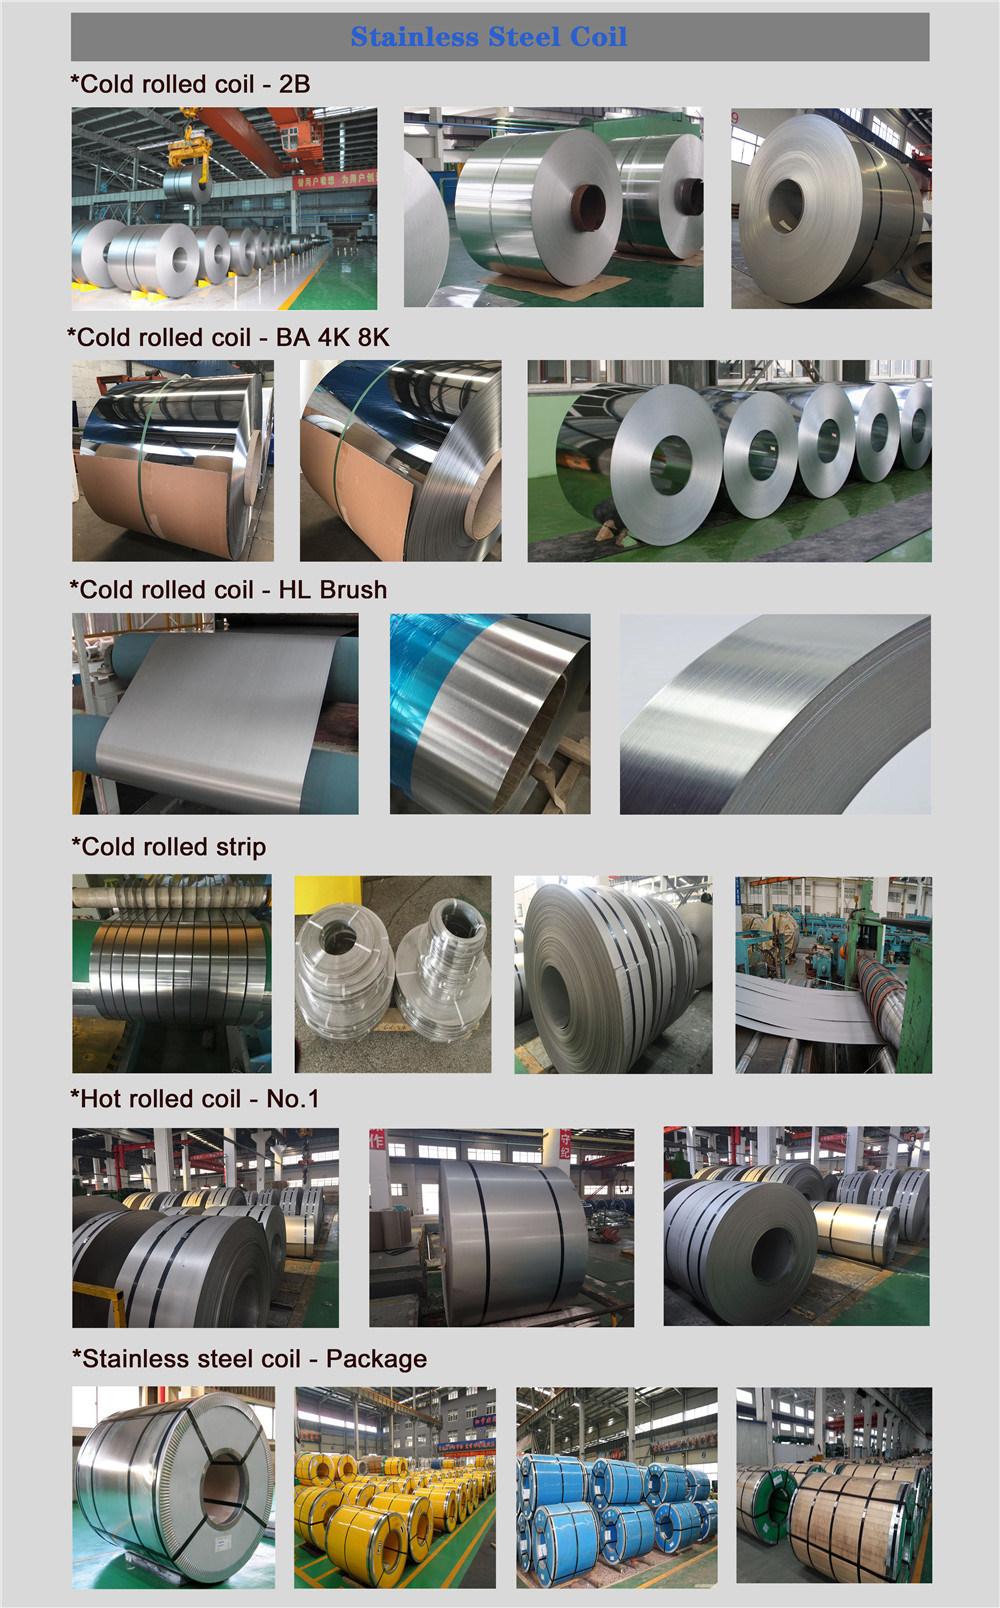 Hot Selling Product 304 Price Per Kg Inoxidable High Strength 304 Price Per Ton of Ba Stainless Steel Coil